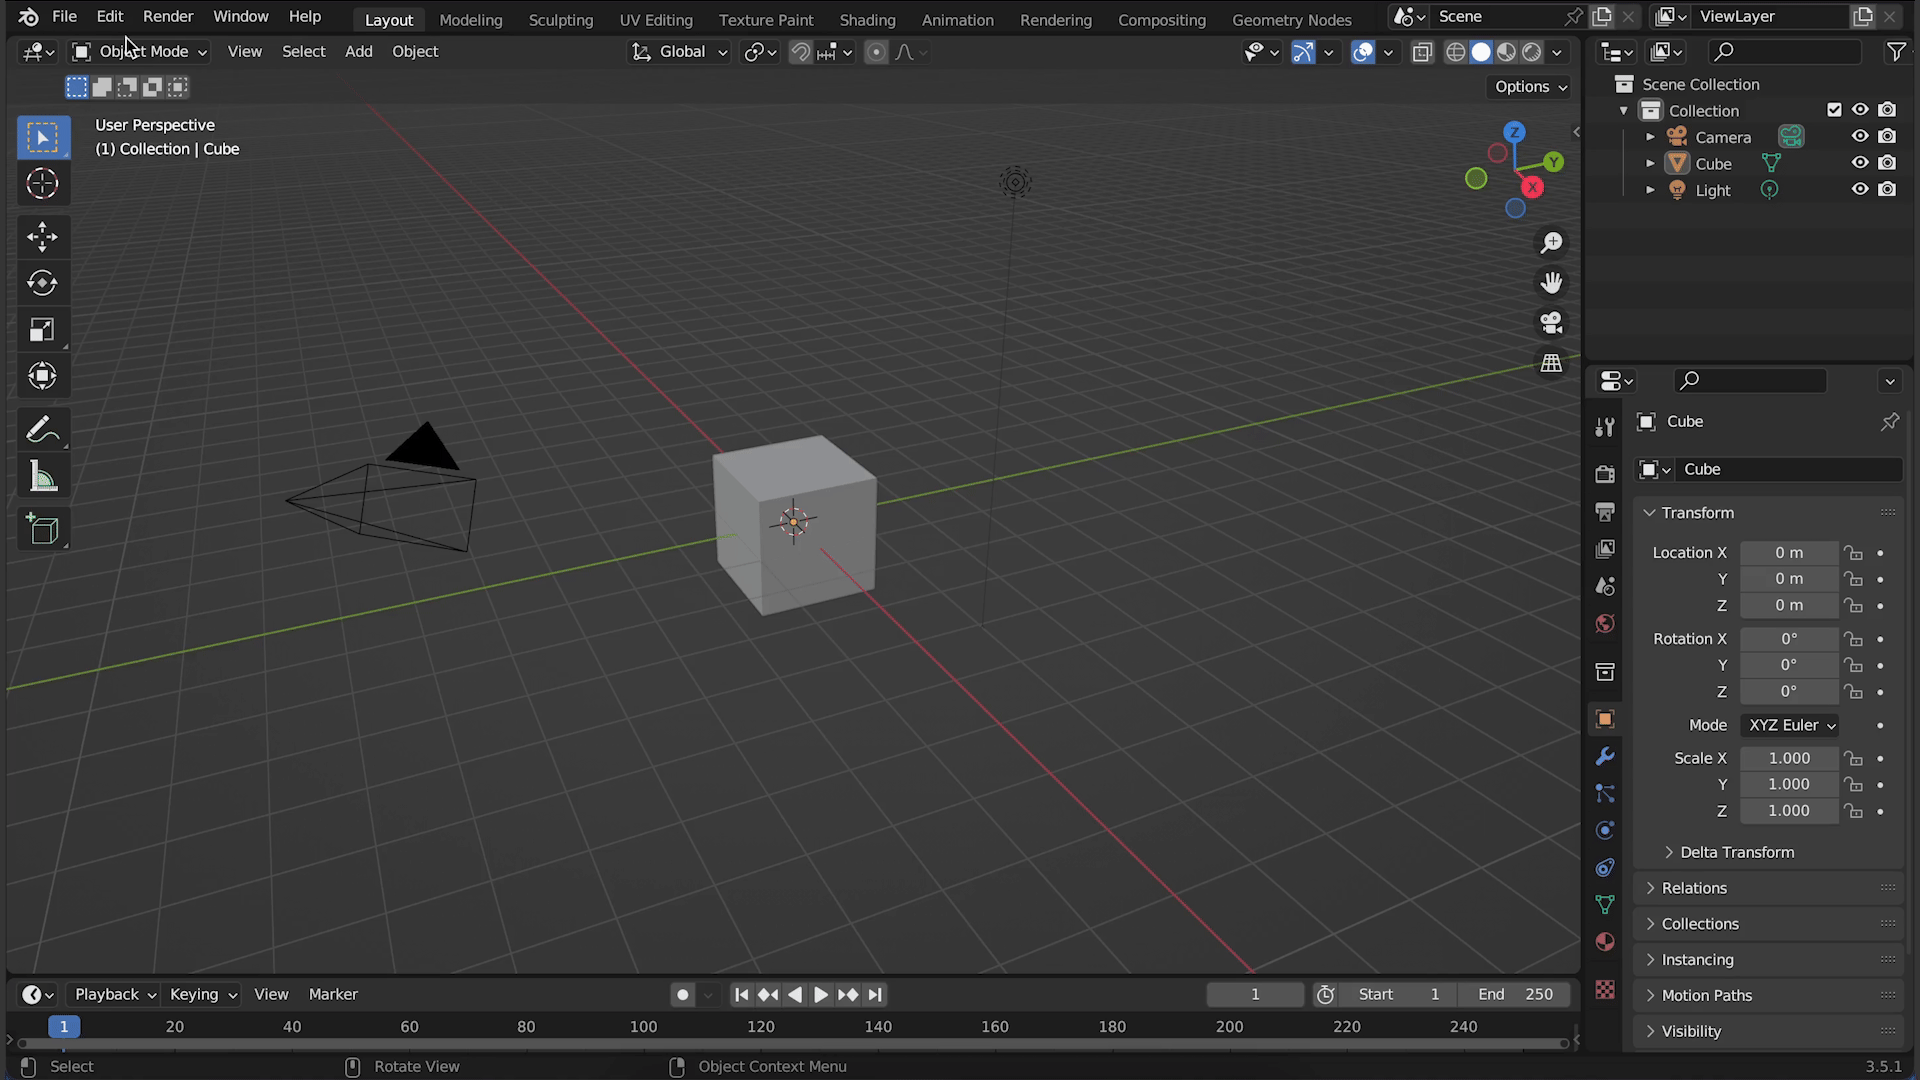 Why is my character white in Blender? - Building Support